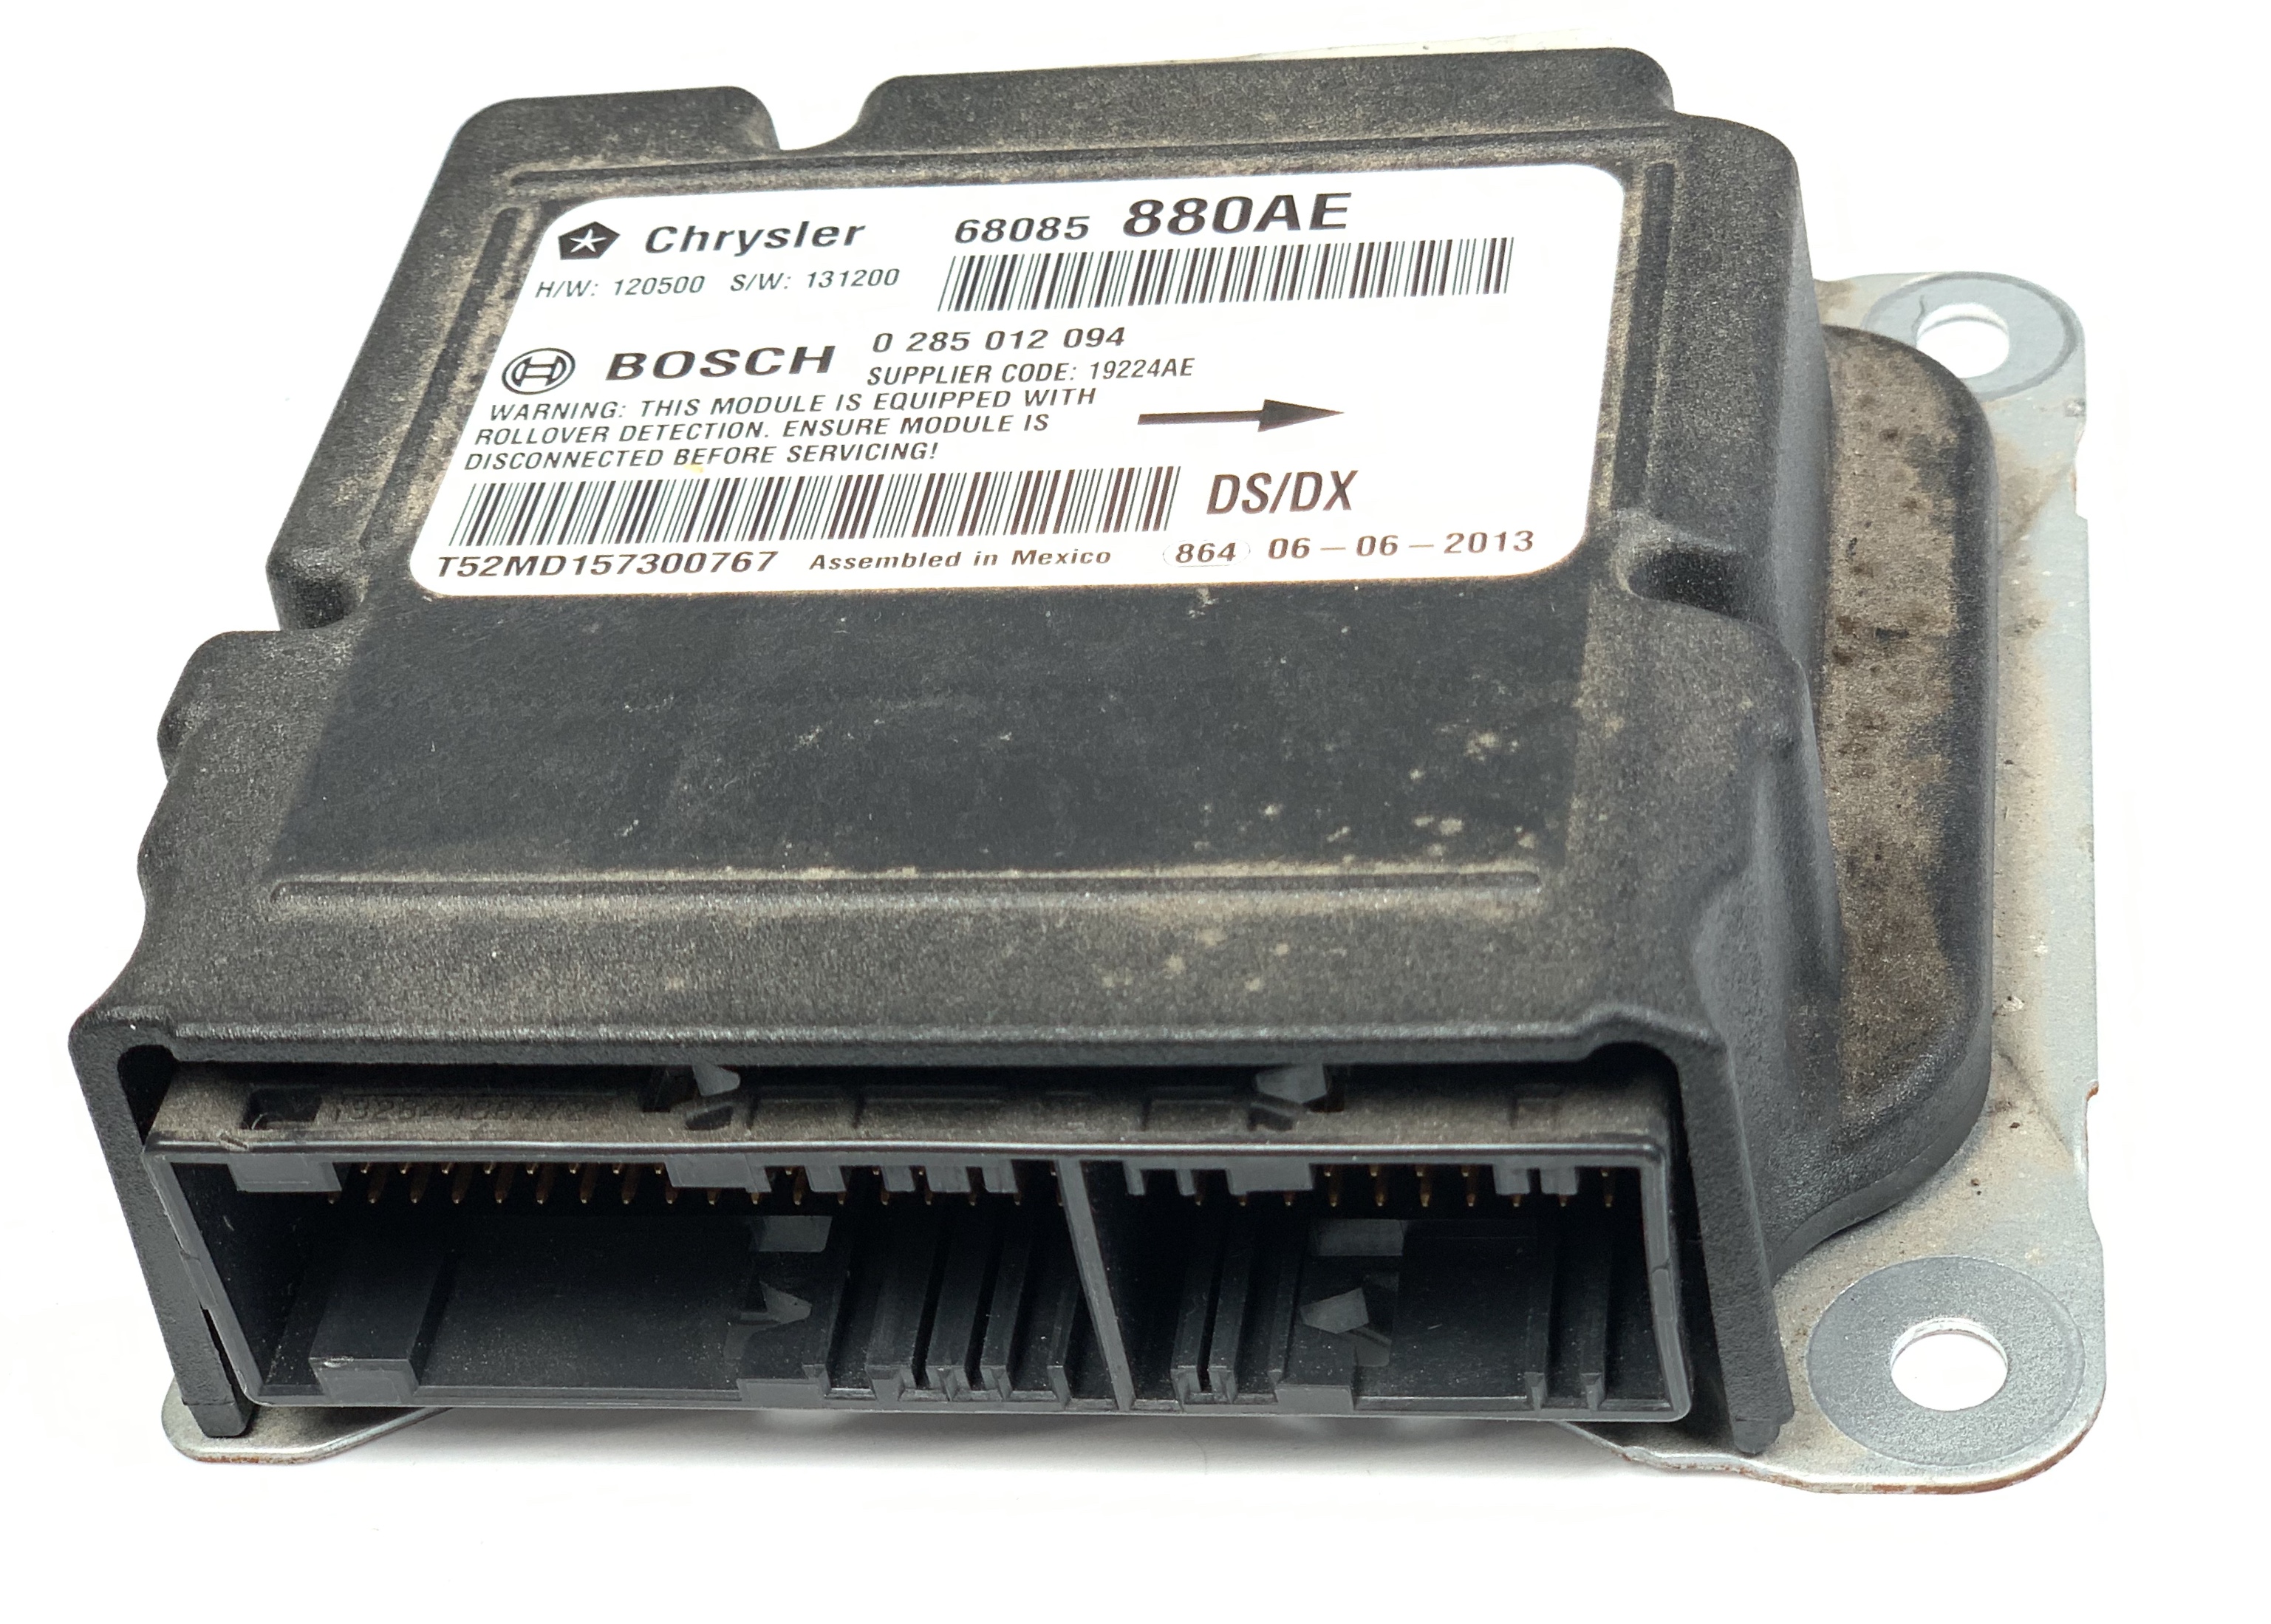 DODGE 1500 SRS ORC ORM Occupant Control Module - Airbag Computer Control Module PART #68085880AE